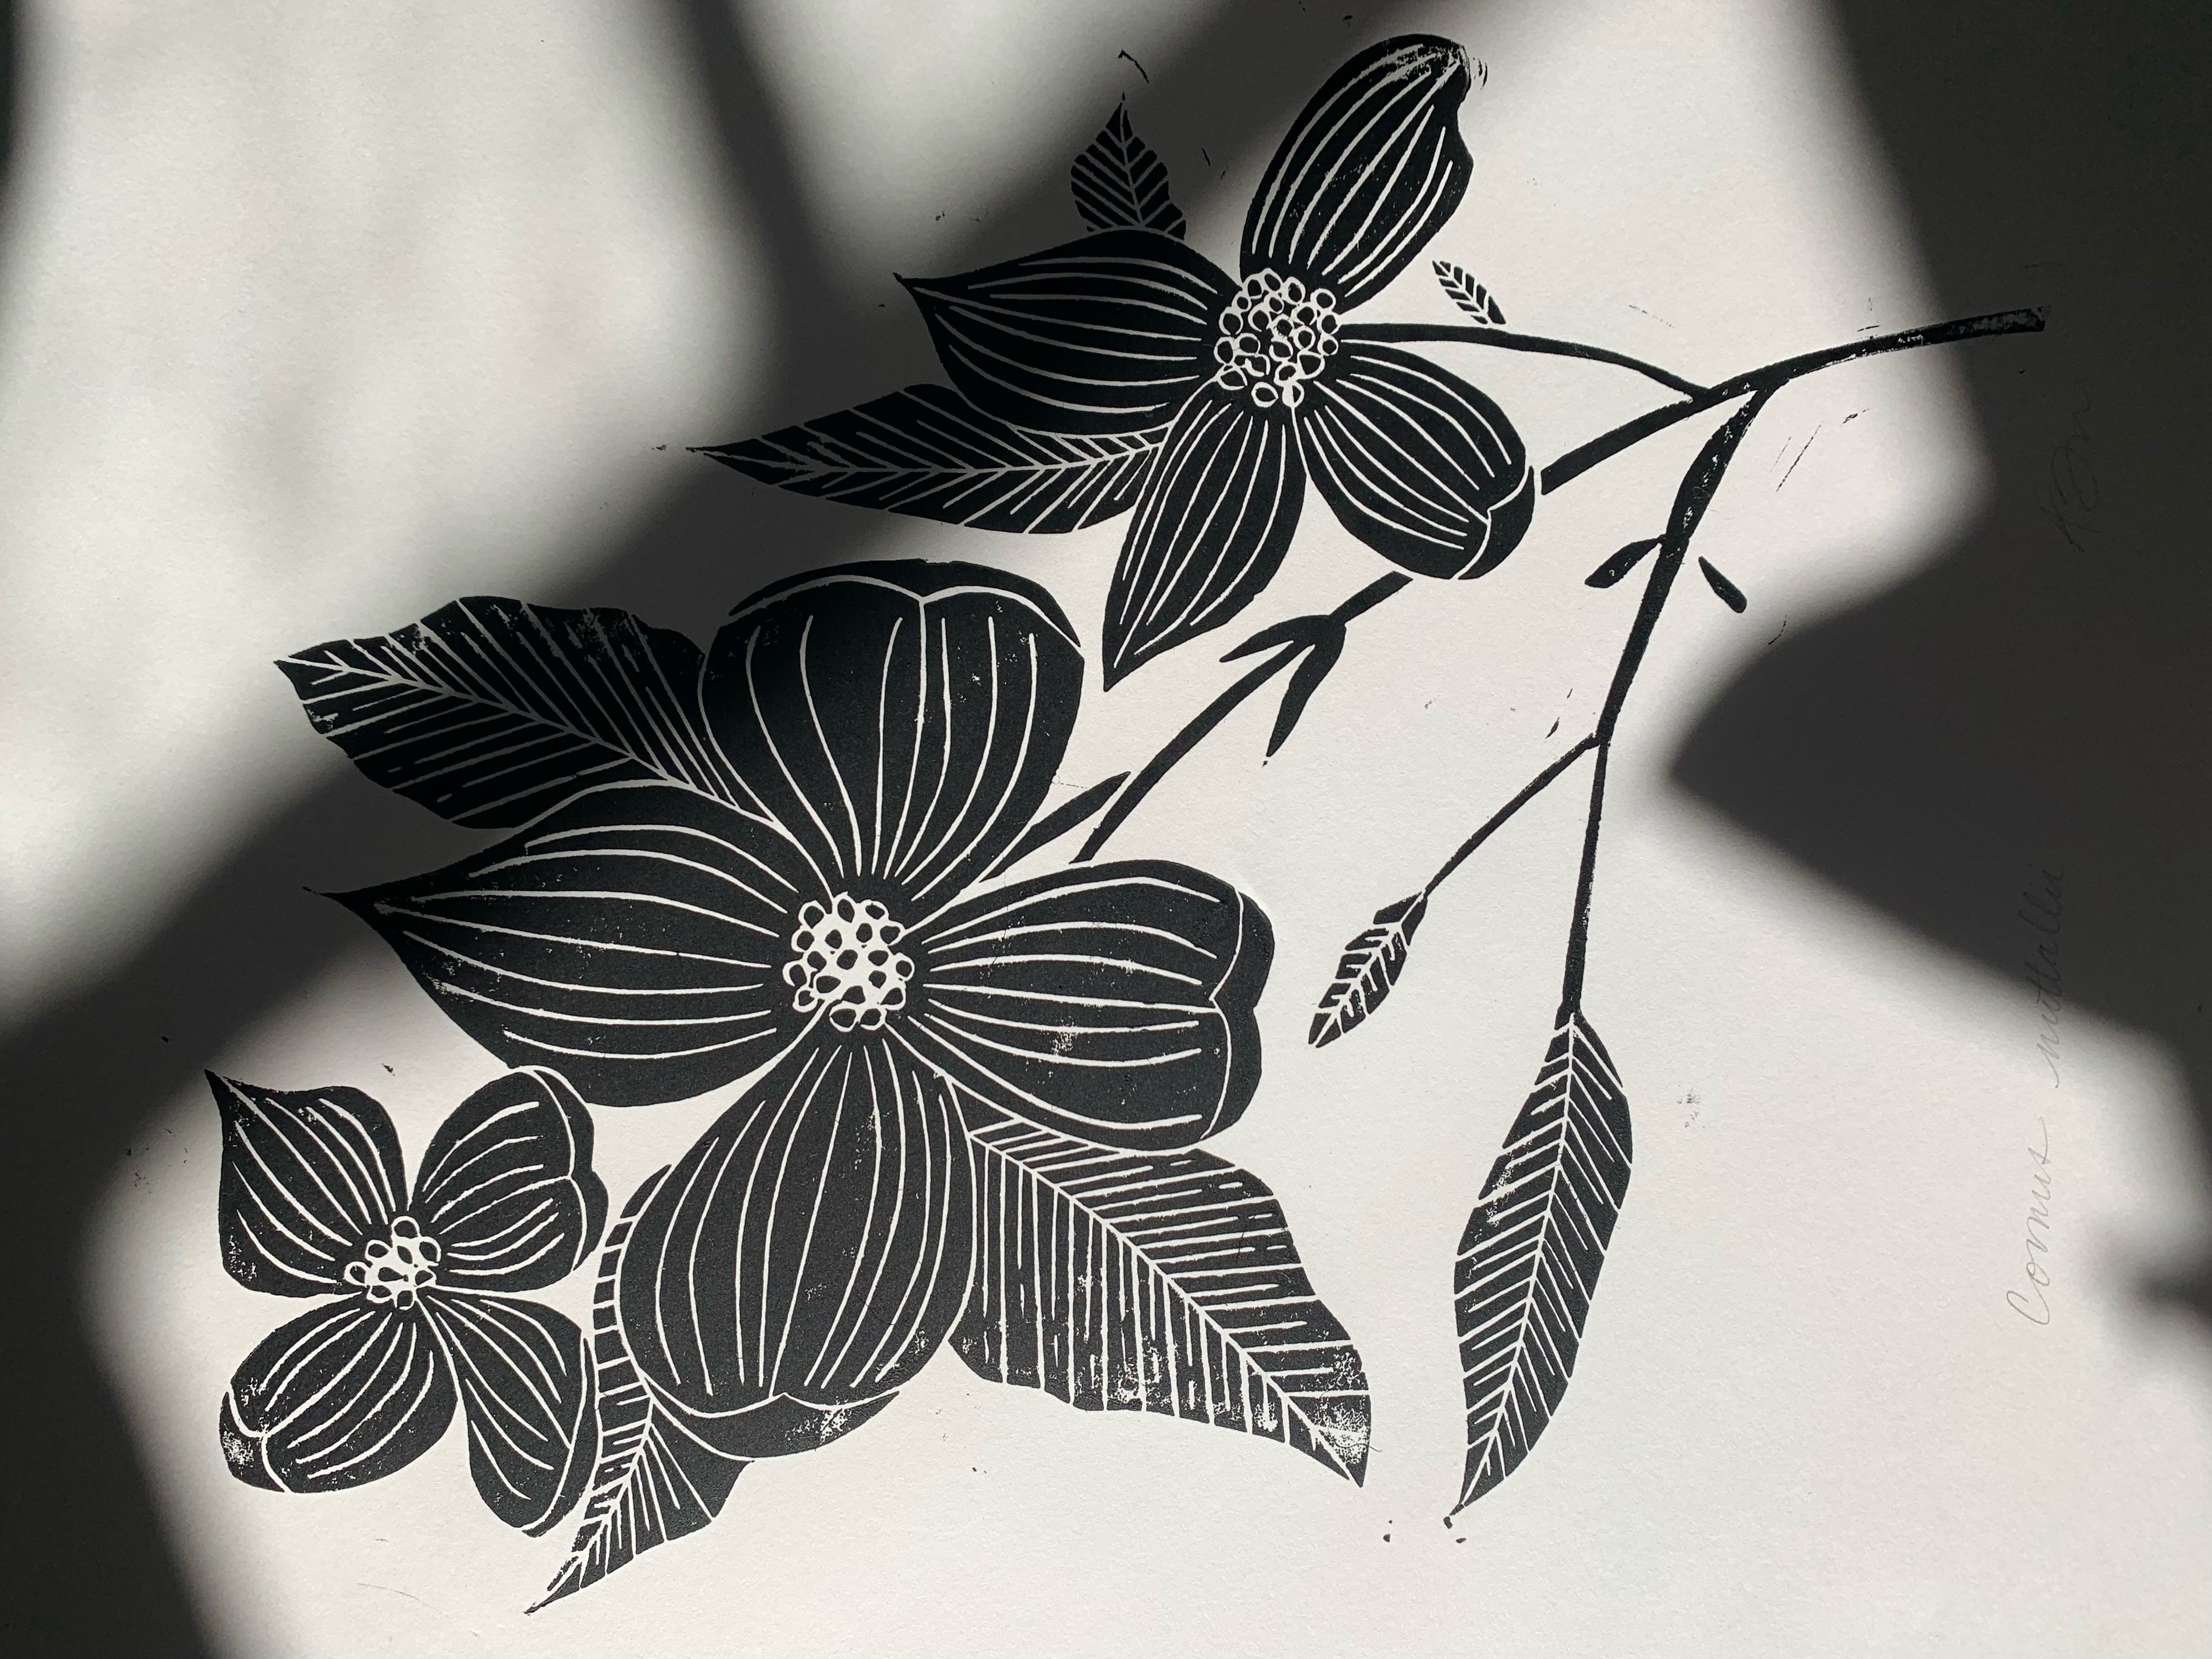 Block print of Pacific dogwood in black ink on white paper partially obscured by shadows.